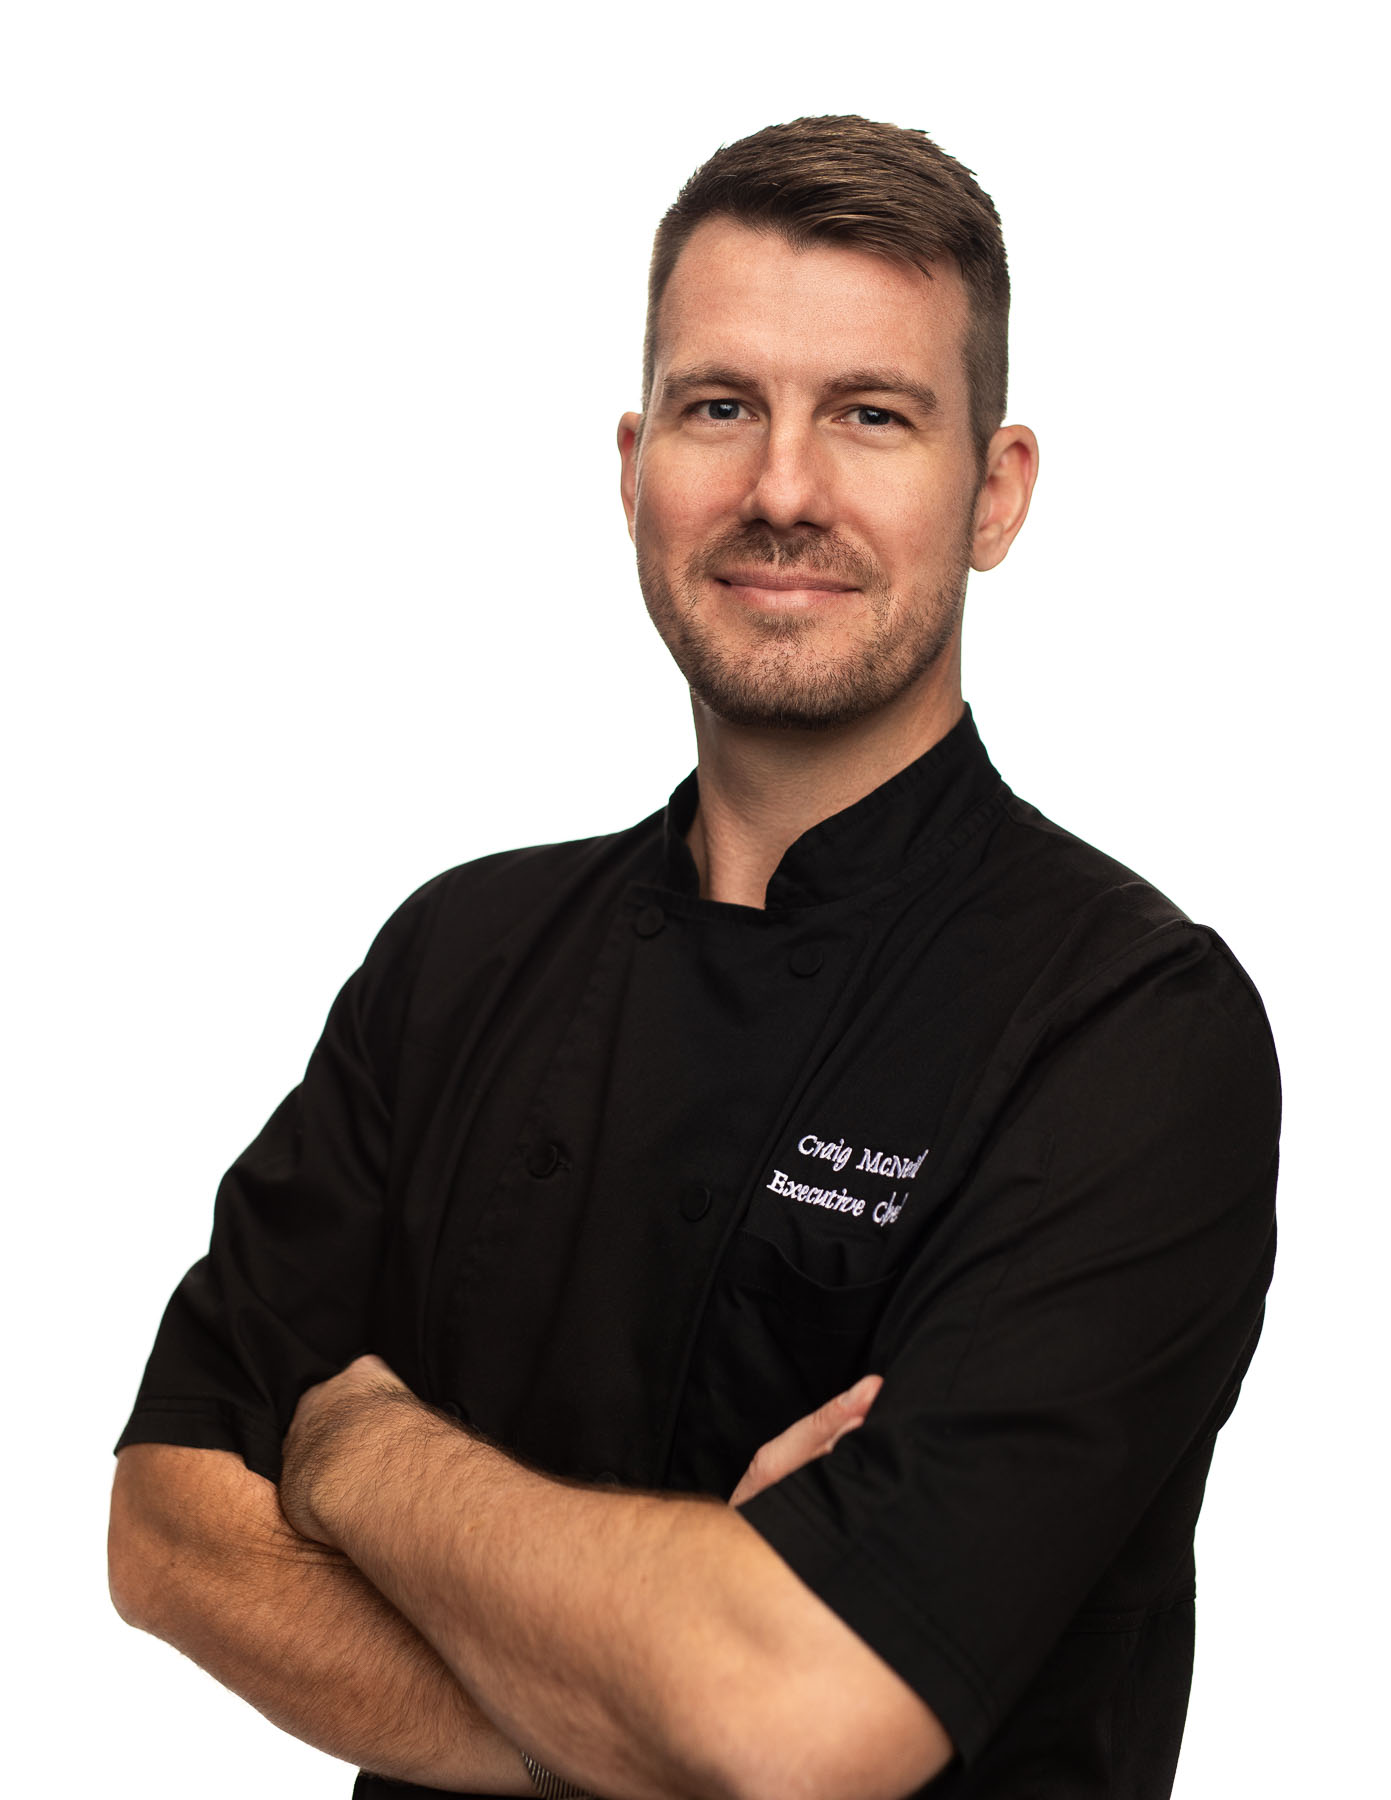 Headshot of man with short hair wearing a black tshirt with label Craig McNeil Executive Chef posing and smiling for the camera with arms crossed